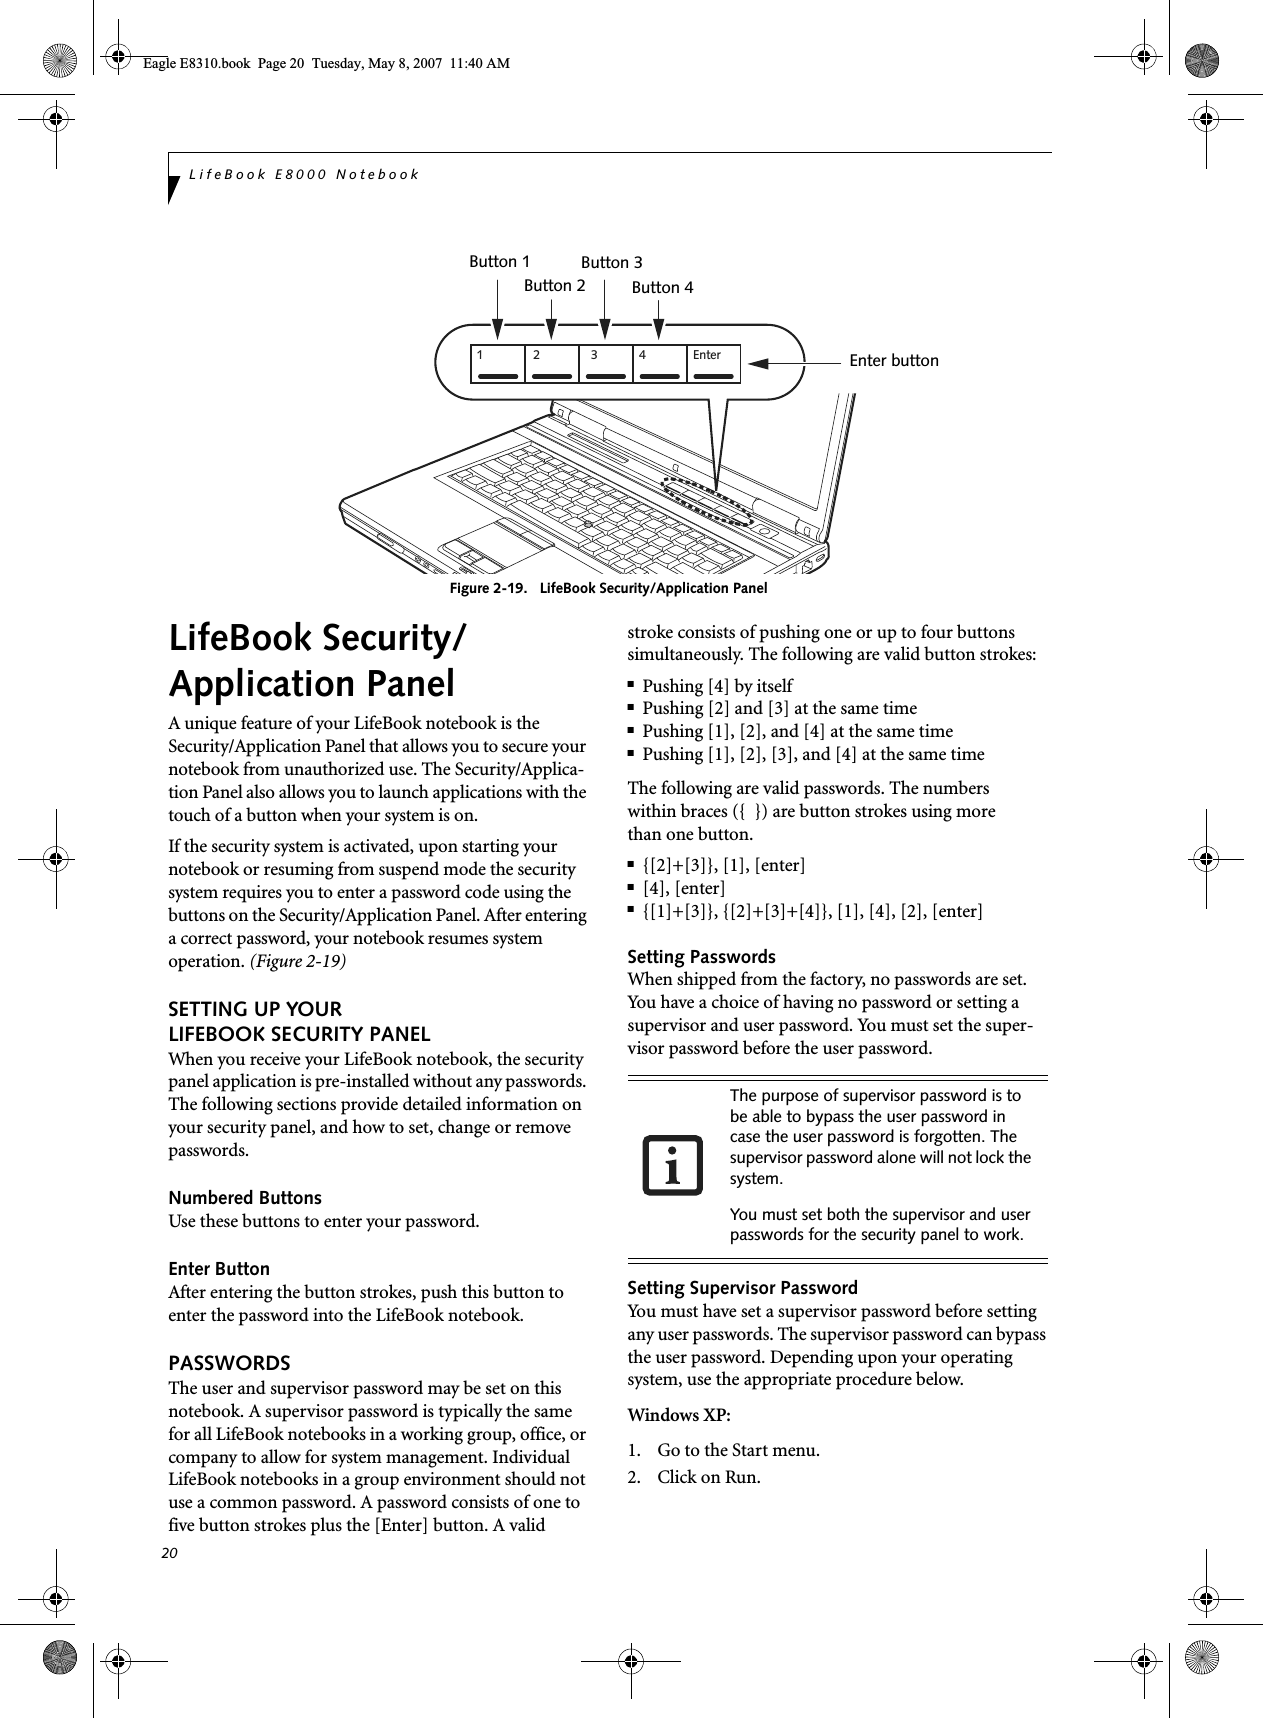 20LifeBook E8000 NotebookFigure 2-19.   LifeBook Security/Application Panel LifeBook Security/Application PanelA unique feature of your LifeBook notebook is the Security/Application Panel that allows you to secure your notebook from unauthorized use. The Security/Applica-tion Panel also allows you to launch applications with the touch of a button when your system is on.If the security system is activated, upon starting your notebook or resuming from suspend mode the security system requires you to enter a password code using the buttons on the Security/Application Panel. After entering a correct password, your notebook resumes system operation. (Figure 2-19)SETTING UP YOUR LIFEBOOK SECURITY PANELWhen you receive your LifeBook notebook, the security panel application is pre-installed without any passwords. The following sections provide detailed information on your security panel, and how to set, change or remove passwords.Numbered ButtonsUse these buttons to enter your password.Enter ButtonAfter entering the button strokes, push this button to enter the password into the LifeBook notebook. PASSWORDSThe user and supervisor password may be set on this notebook. A supervisor password is typically the same for all LifeBook notebooks in a working group, office, or company to allow for system management. Individual LifeBook notebooks in a group environment should not use a common password. A password consists of one to five button strokes plus the [Enter] button. A valid stroke consists of pushing one or up to four buttons simultaneously. The following are valid button strokes: ■Pushing [4] by itself■Pushing [2] and [3] at the same time■Pushing [1], [2], and [4] at the same time■Pushing [1], [2], [3], and [4] at the same timeThe following are valid passwords. The numberswithin braces ({  }) are button strokes using morethan one button. ■{[2]+[3]}, [1], [enter]■[4], [enter]■{[1]+[3]}, {[2]+[3]+[4]}, [1], [4], [2], [enter]Setting PasswordsWhen shipped from the factory, no passwords are set. You have a choice of having no password or setting a supervisor and user password. You must set the super-visor password before the user password. Setting Supervisor PasswordYou must have set a supervisor password before setting any user passwords. The supervisor password can bypass the user password. Depending upon your operating system, use the appropriate procedure below.Windows XP:1. Go to the Start menu.2. Click on Run.1 2 3 4 EnterEnter buttonButton 1Button 2Button 3Button 4The purpose of supervisor password is to be able to bypass the user password in case the user password is forgotten. The supervisor password alone will not lock the system.You must set both the supervisor and user passwords for the security panel to work.Eagle E8310.book  Page 20  Tuesday, May 8, 2007  11:40 AM